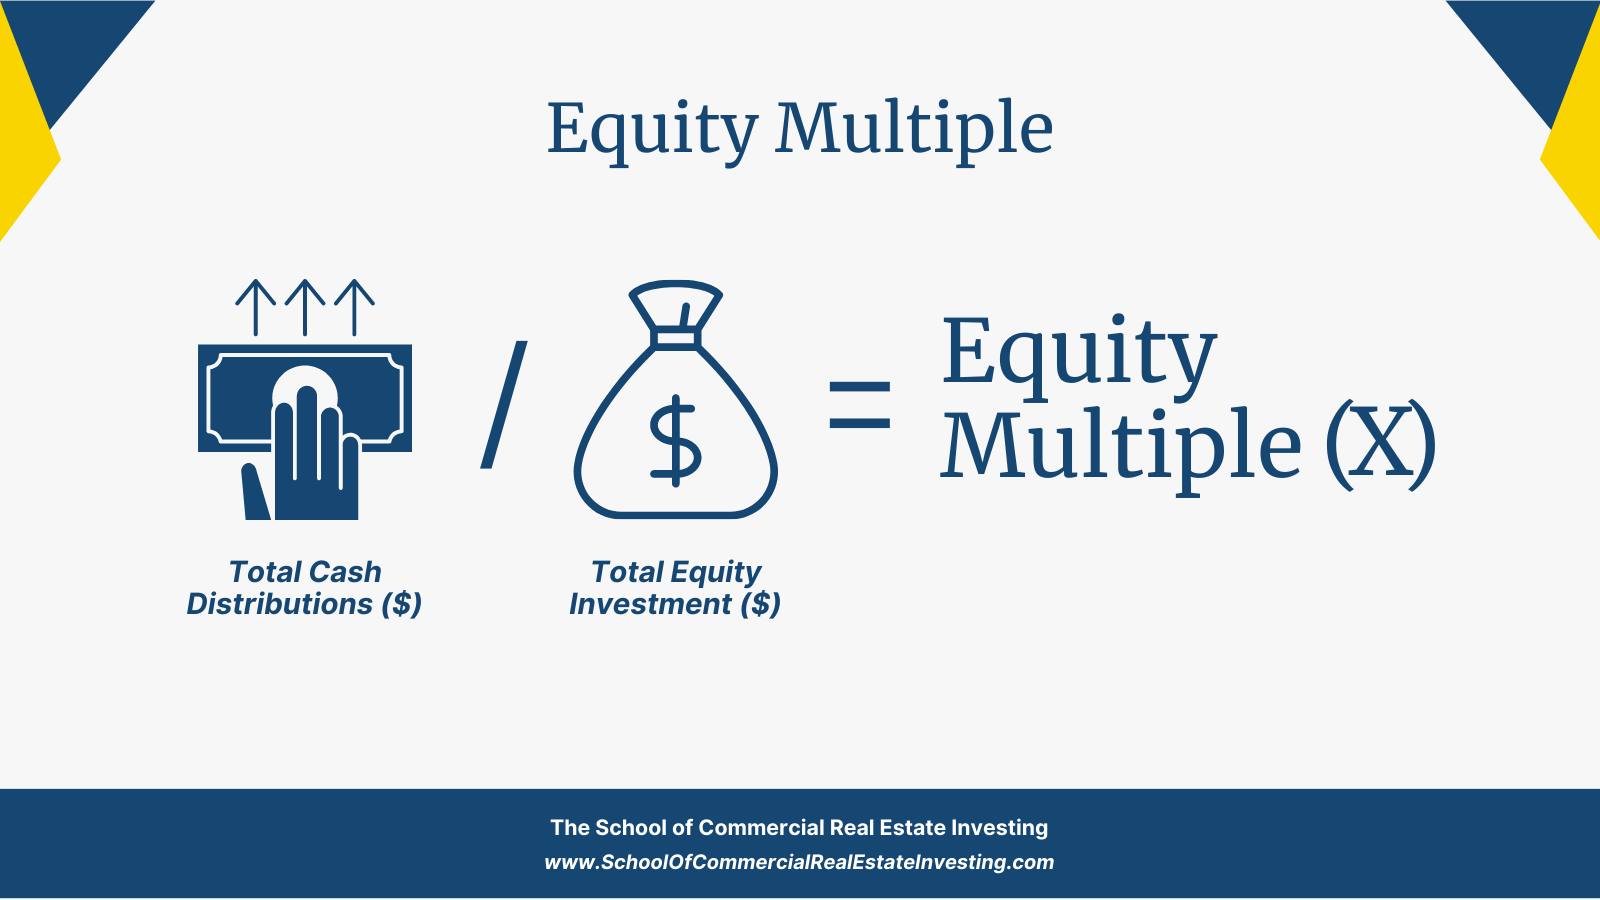 Calculate the Equity Multiple by dividing the total cash distributions by the equity investment.